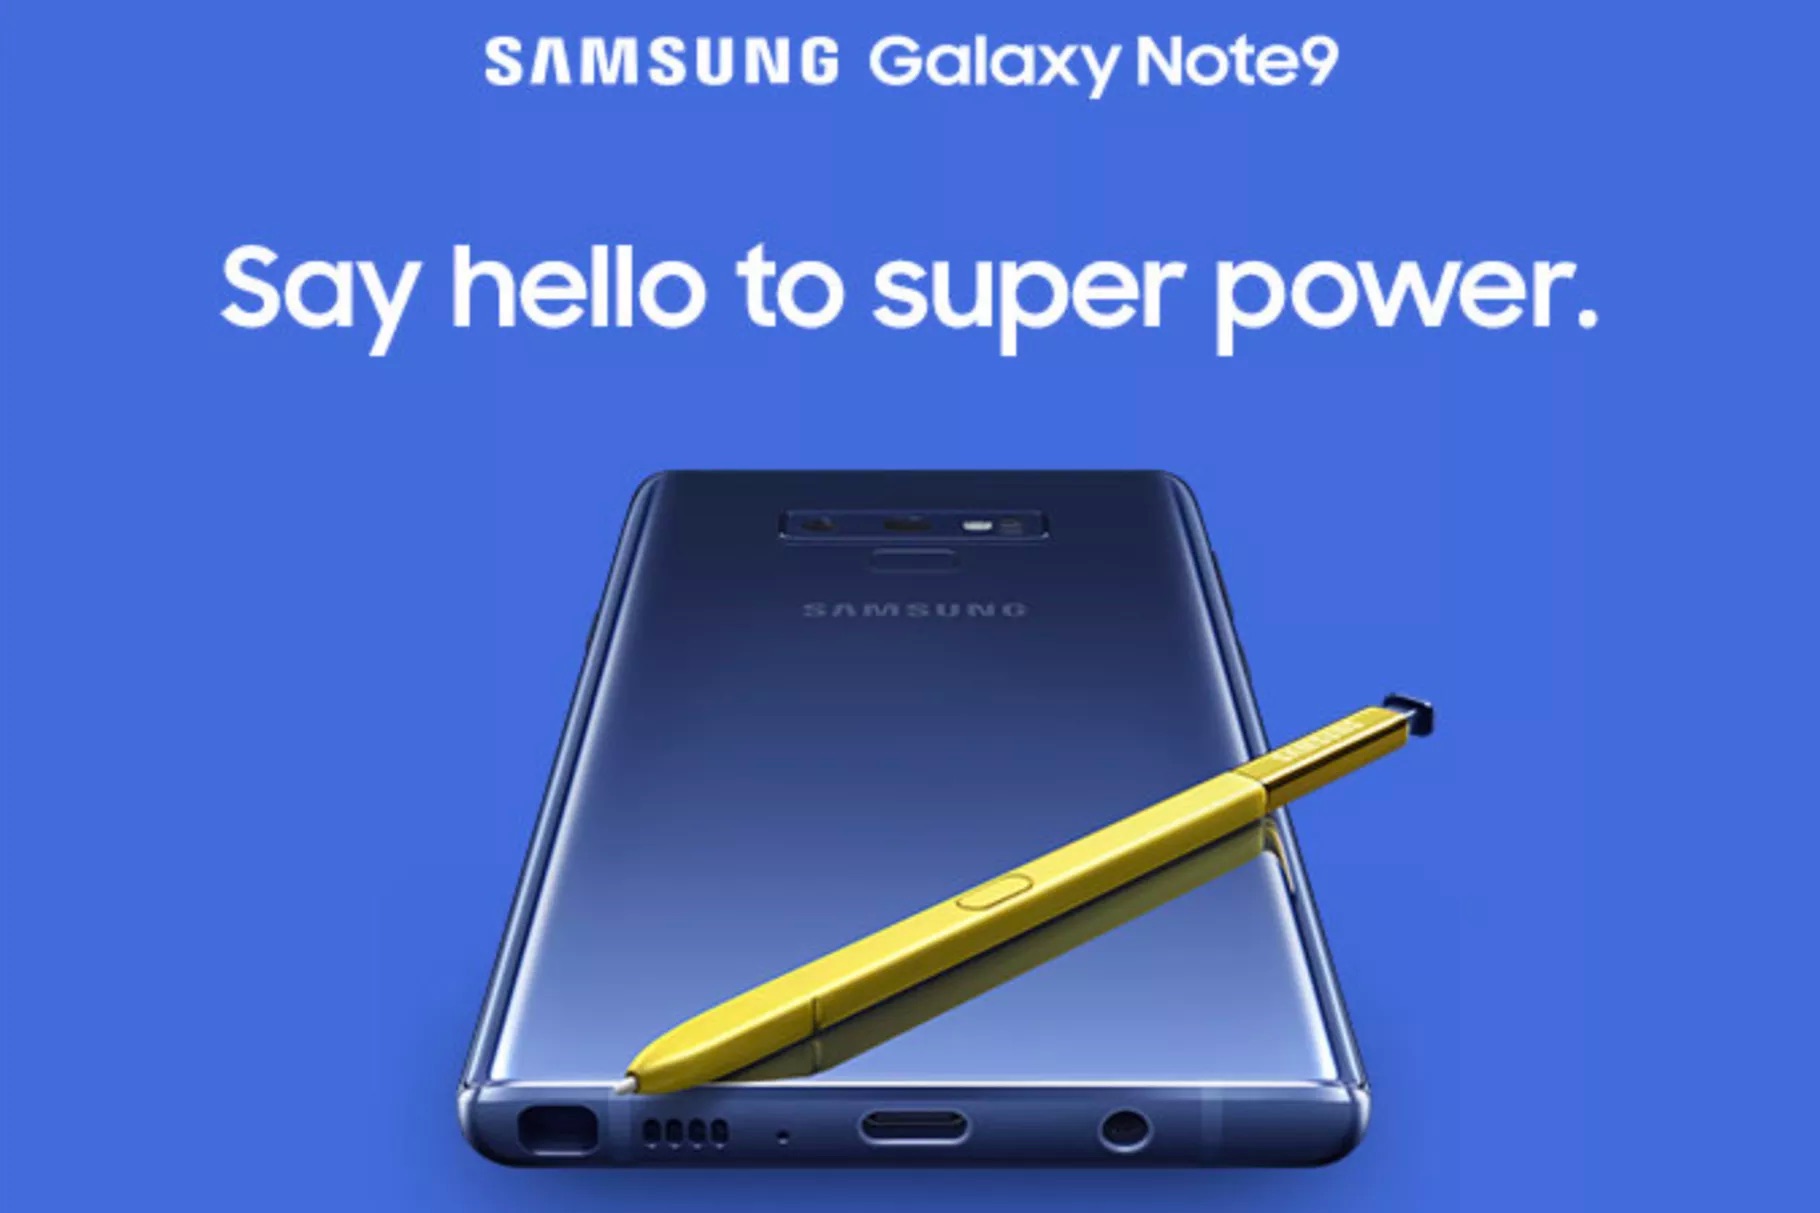 galaxy note 9 date sortie officielle fixee 24 aout